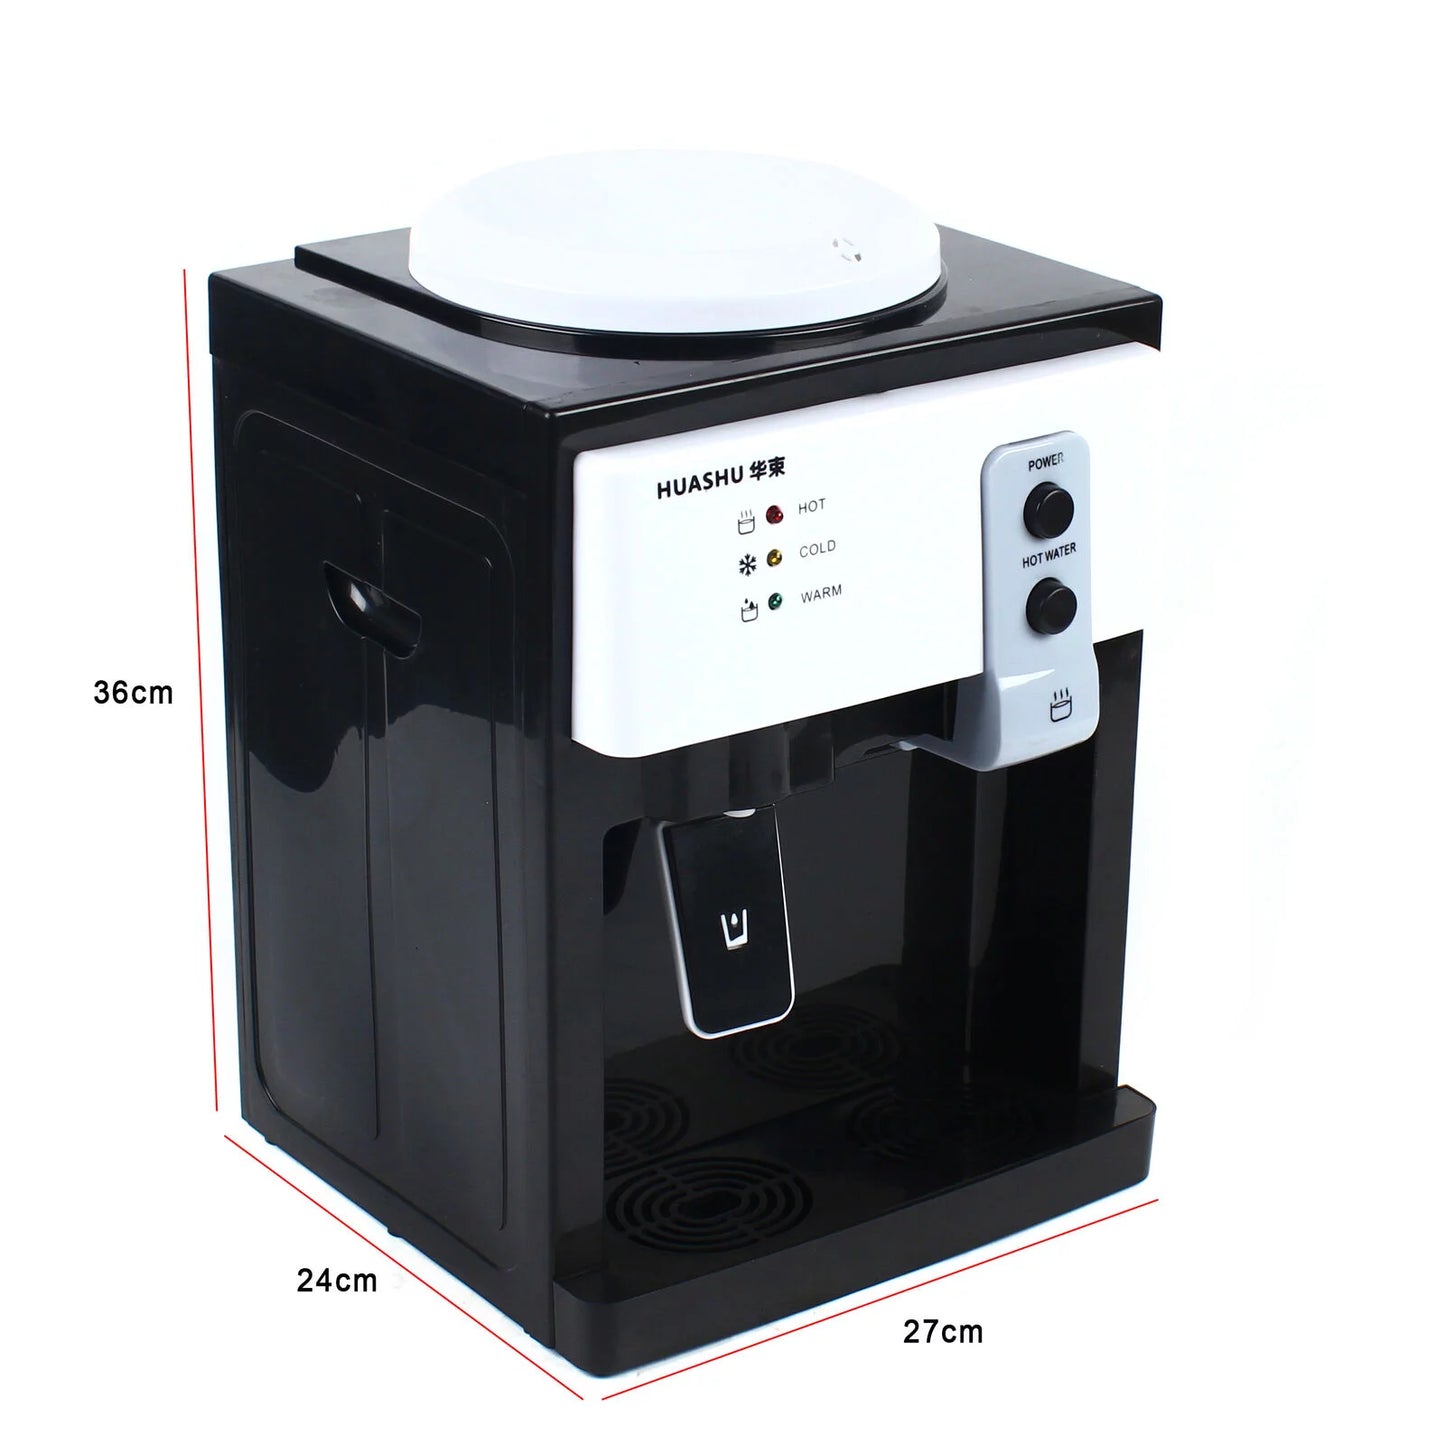 ZhdnBhnos 5 Gallon Countertop Electric Hot & Cold Water Cooler Dispenser Top Loading Drinking Machine For Home Office